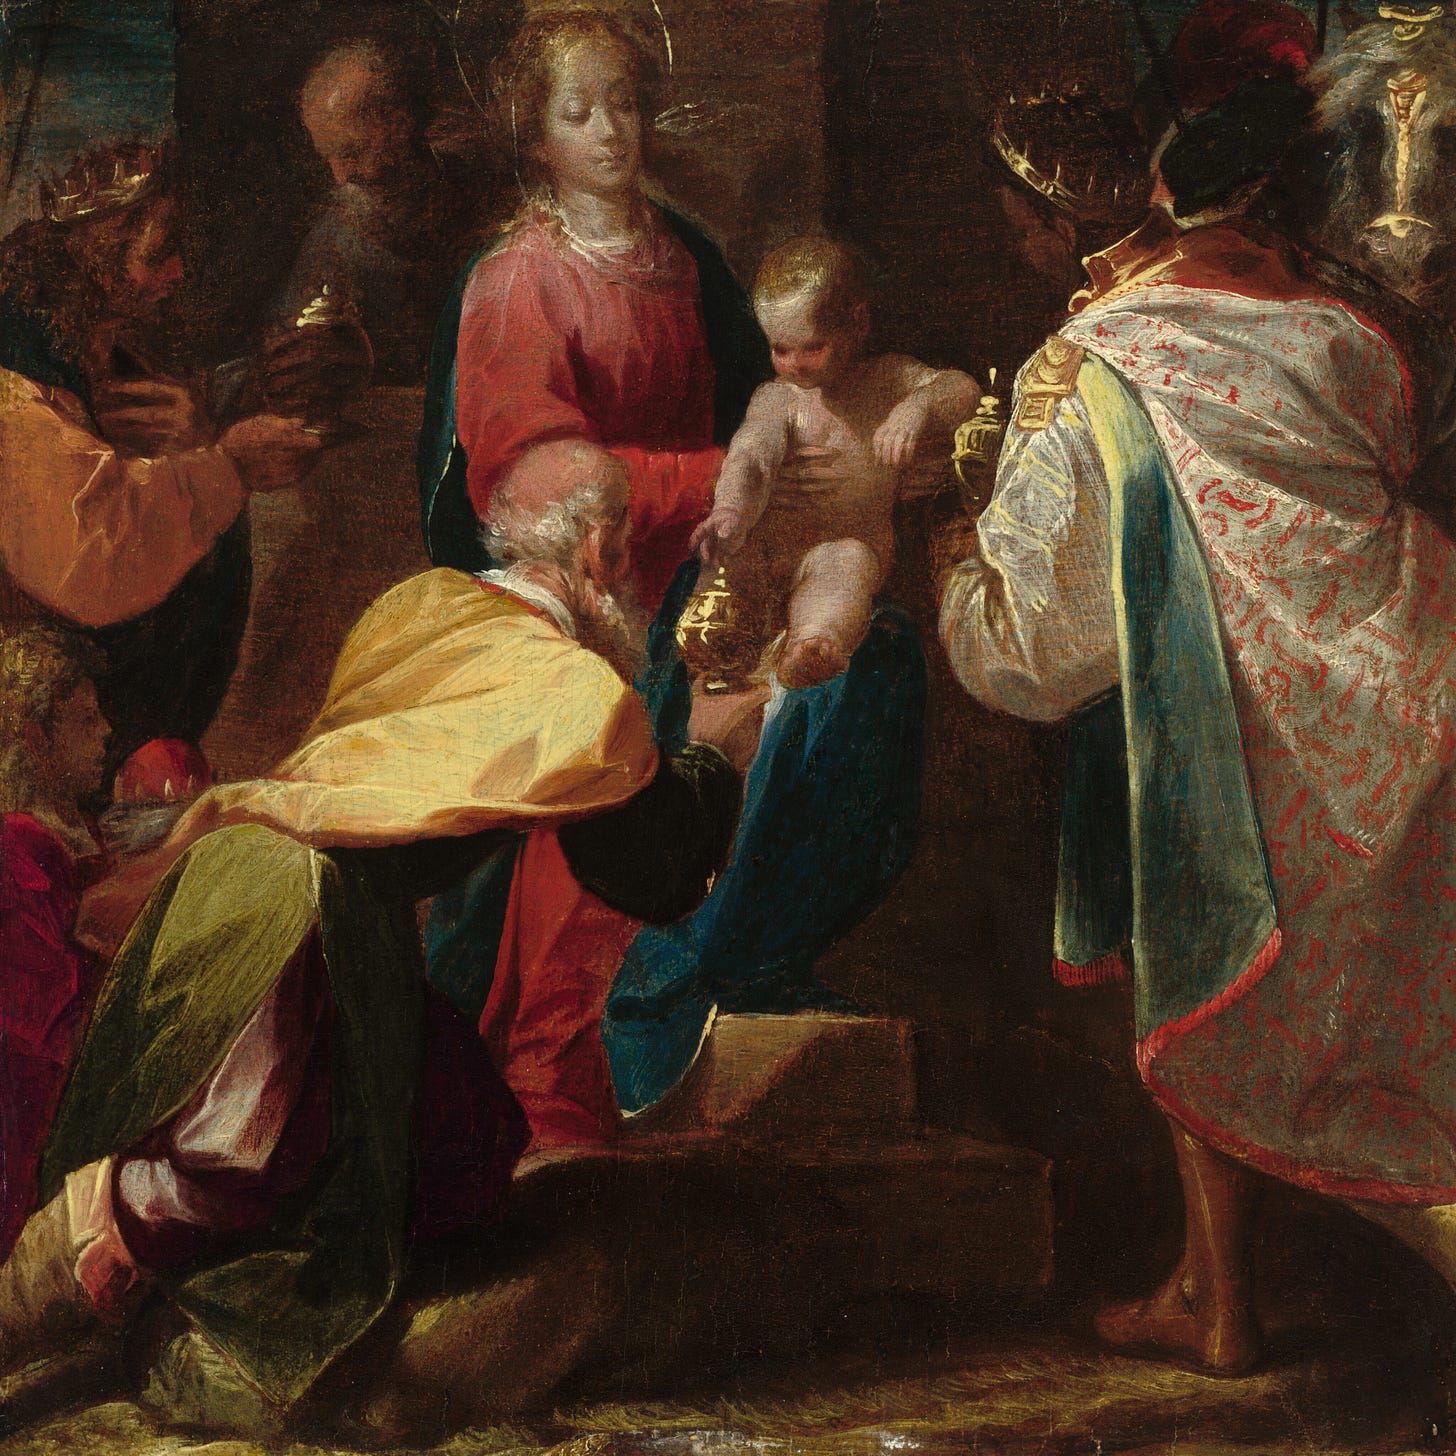 The Adoration of the Magi, c. 1600 by Pier Francesco Mazzucchelli, called Morazzone 